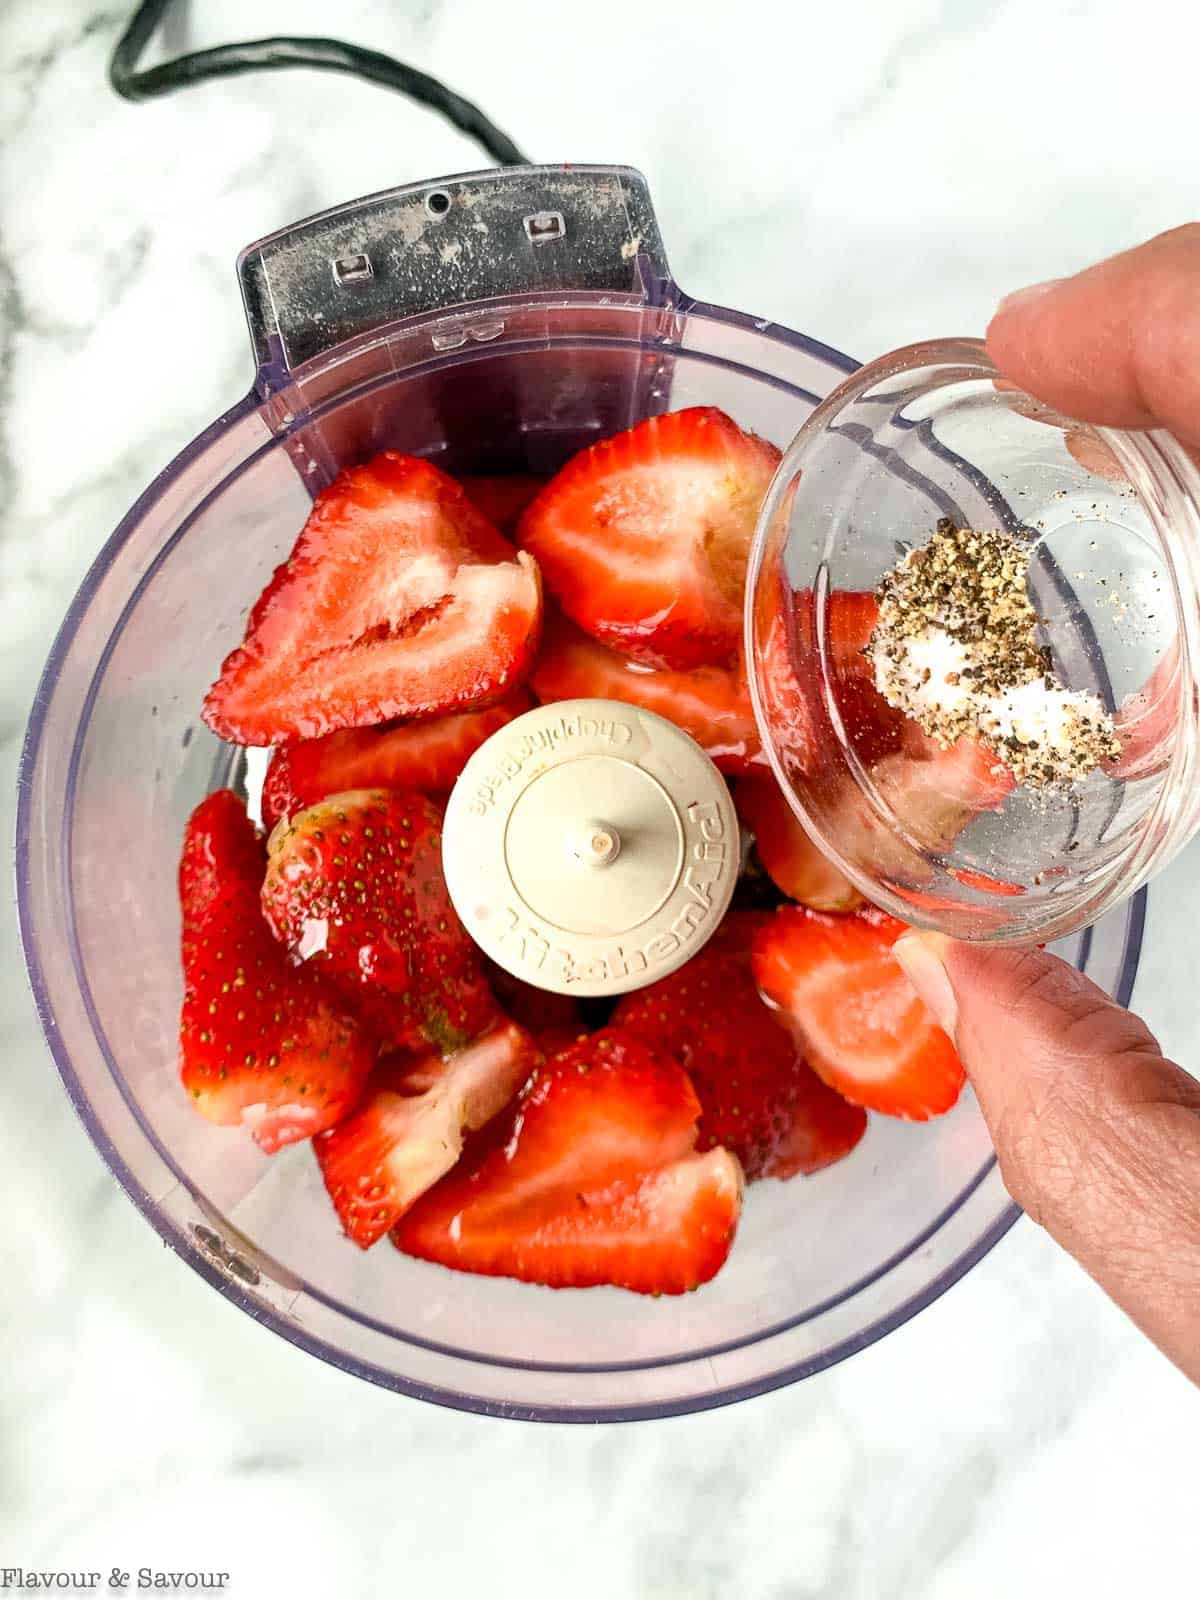 Adding salt and pepper to strawberry salad dressing ingredients.